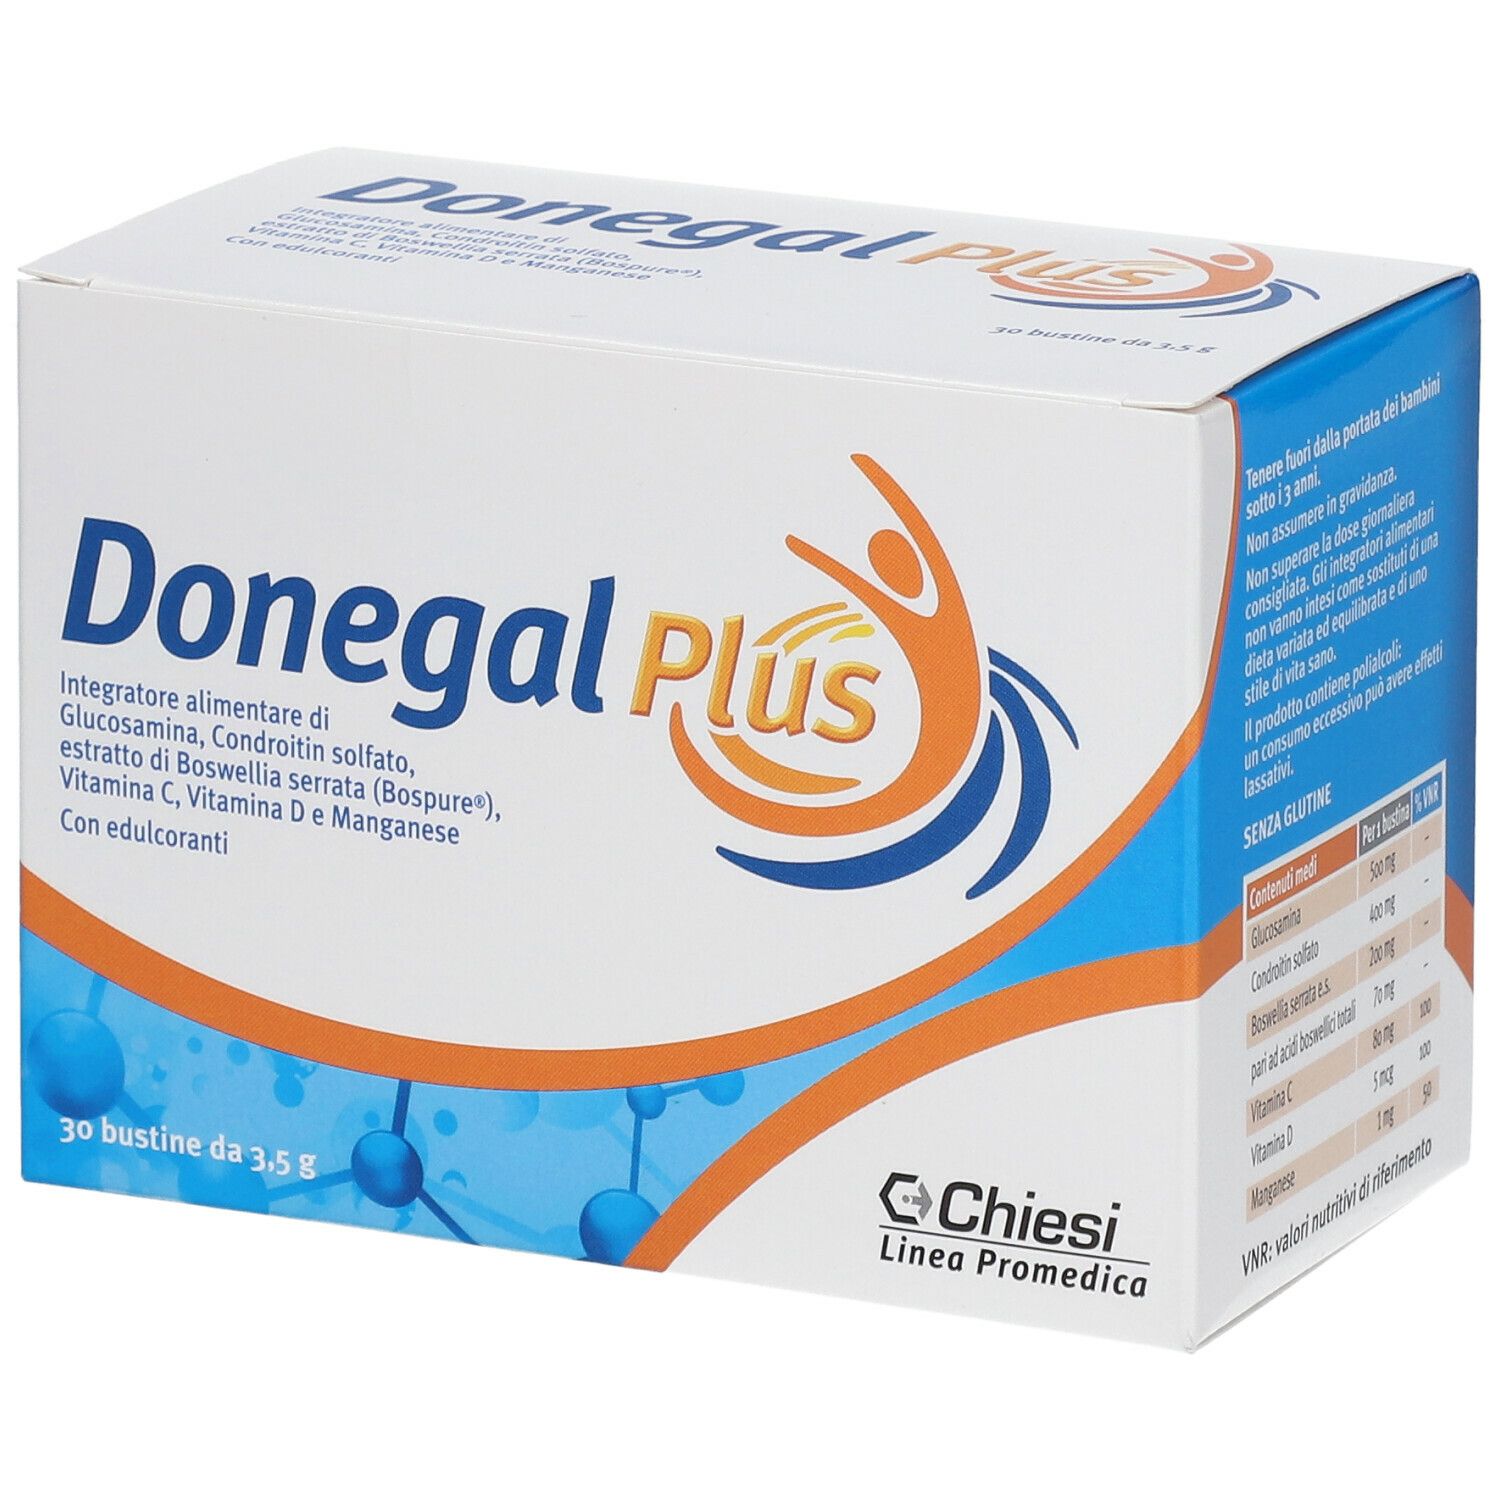 Image of Donegal Plus